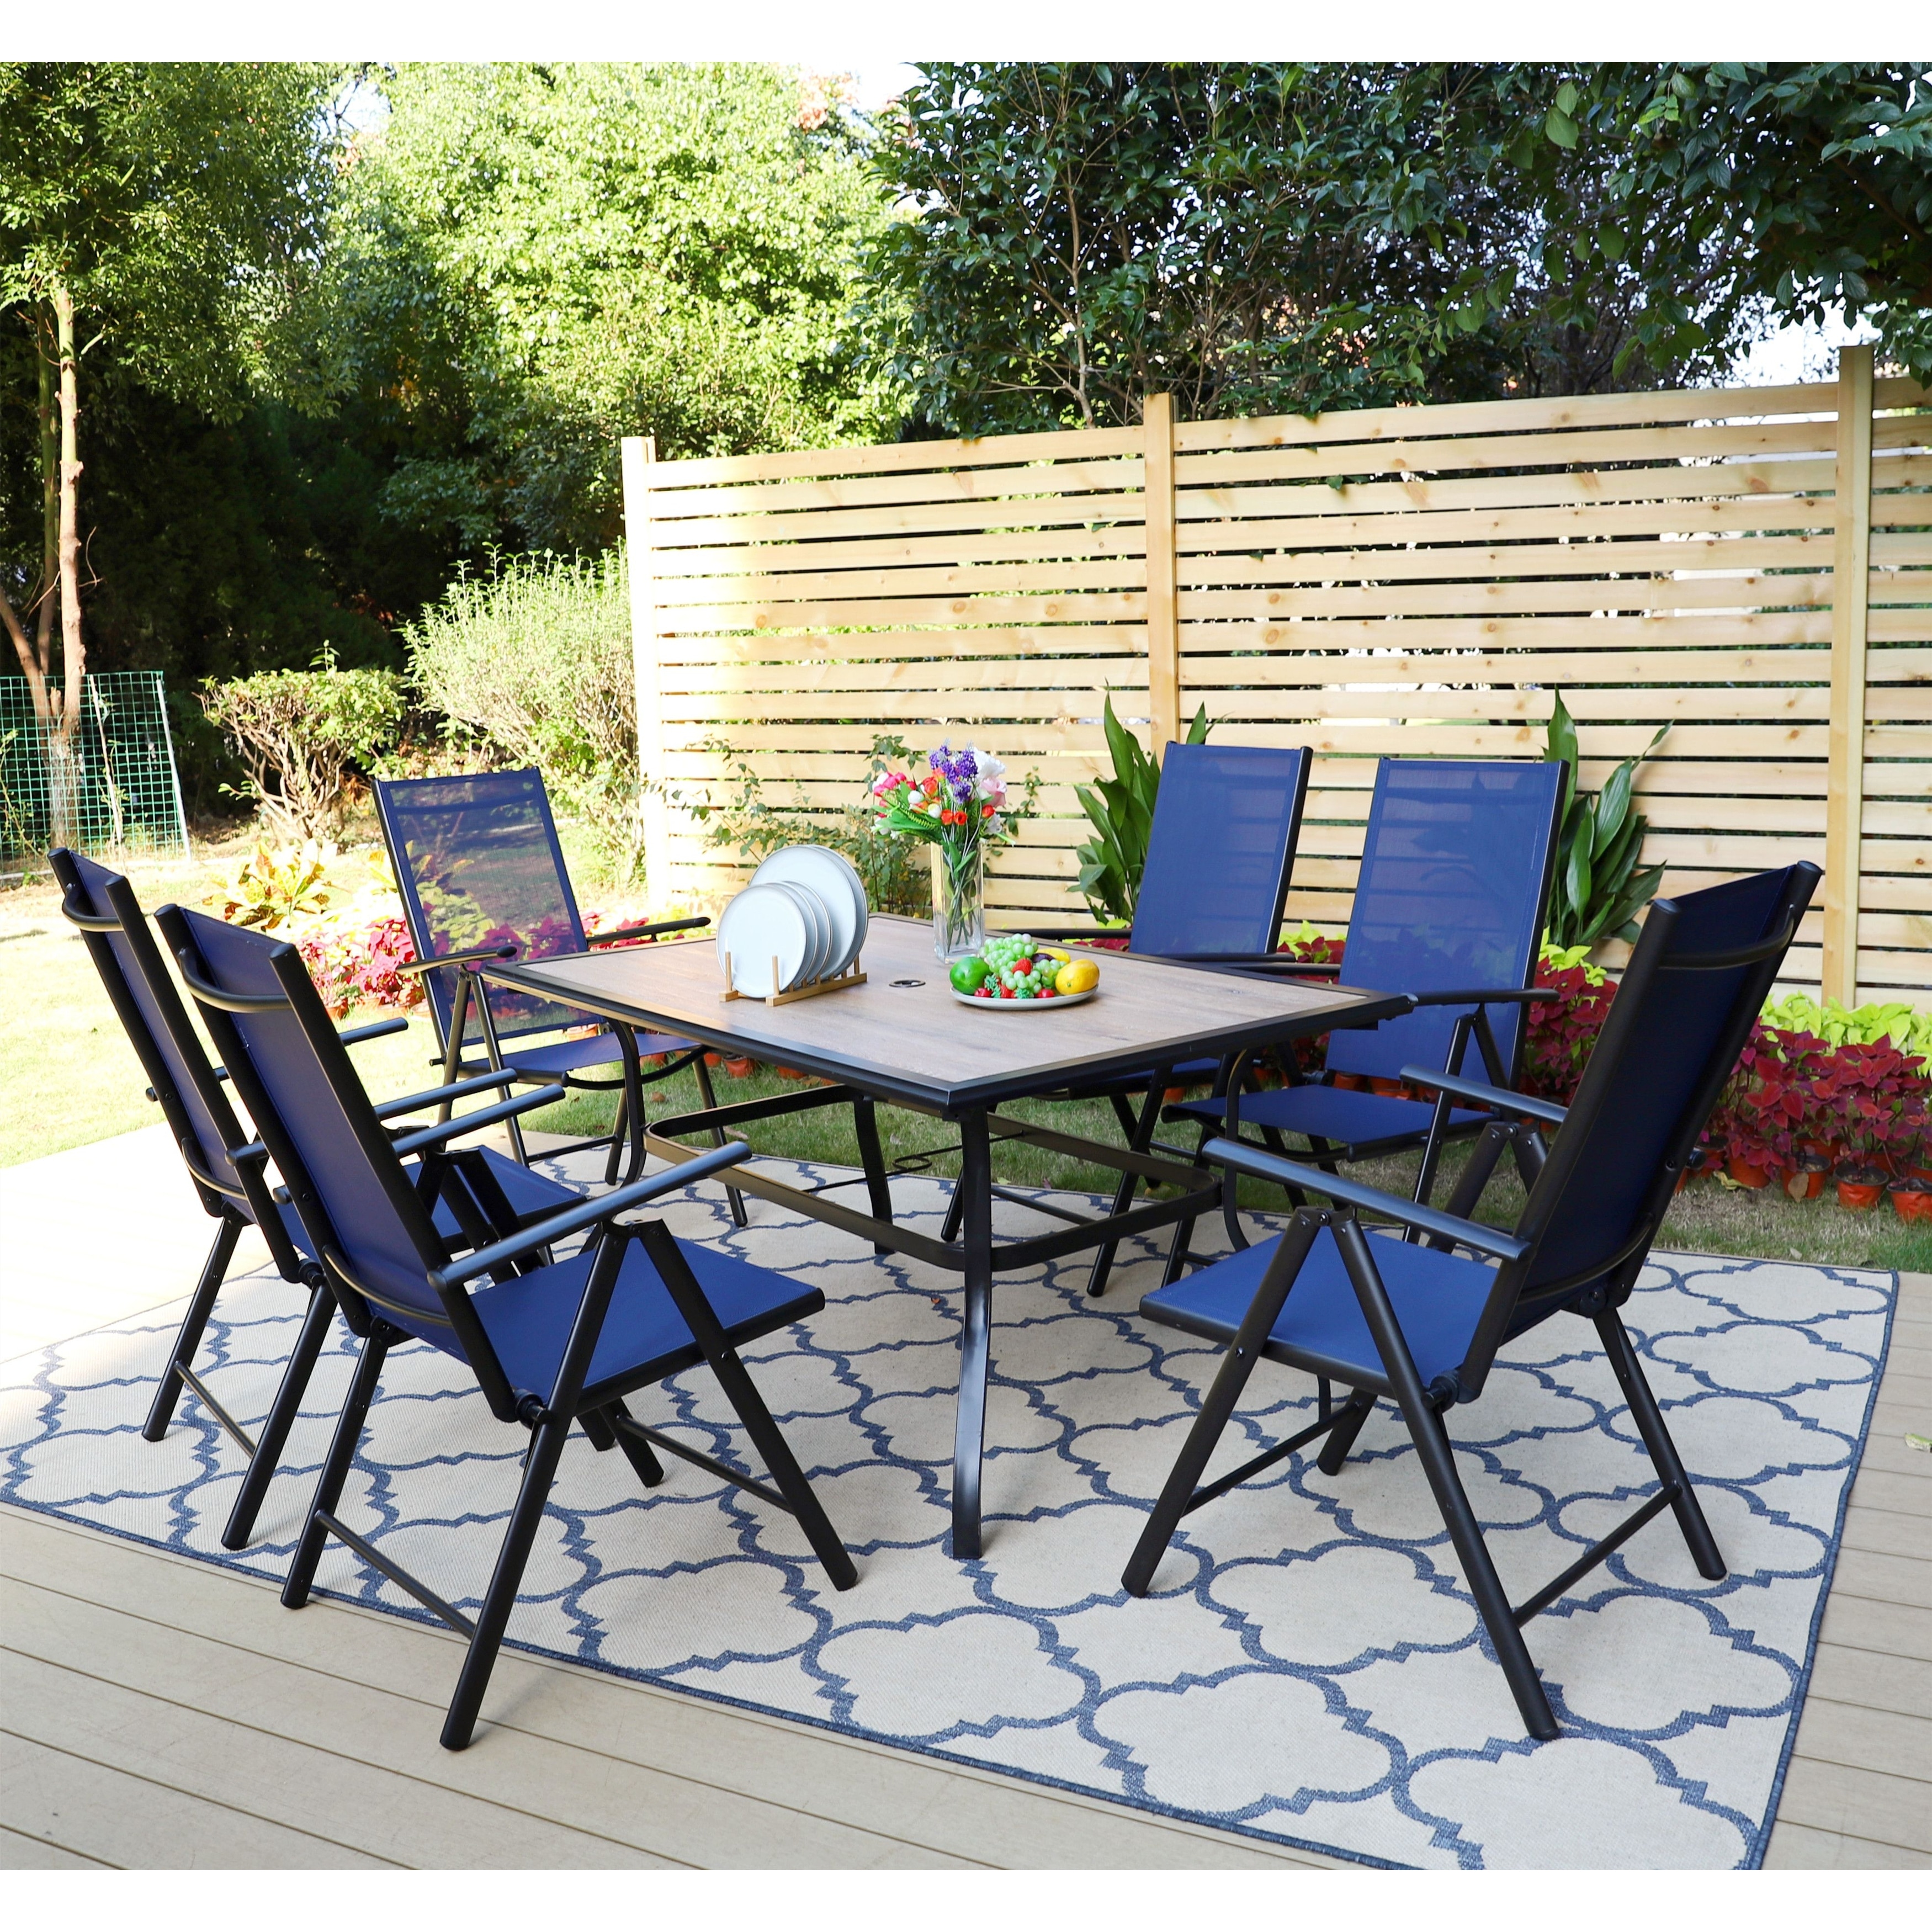 Sophia and William Patio 7 Pieces Dining Set  6 X Reclining Folding Sling Dining Chairs And 1 X Table With An Umbrella Hole